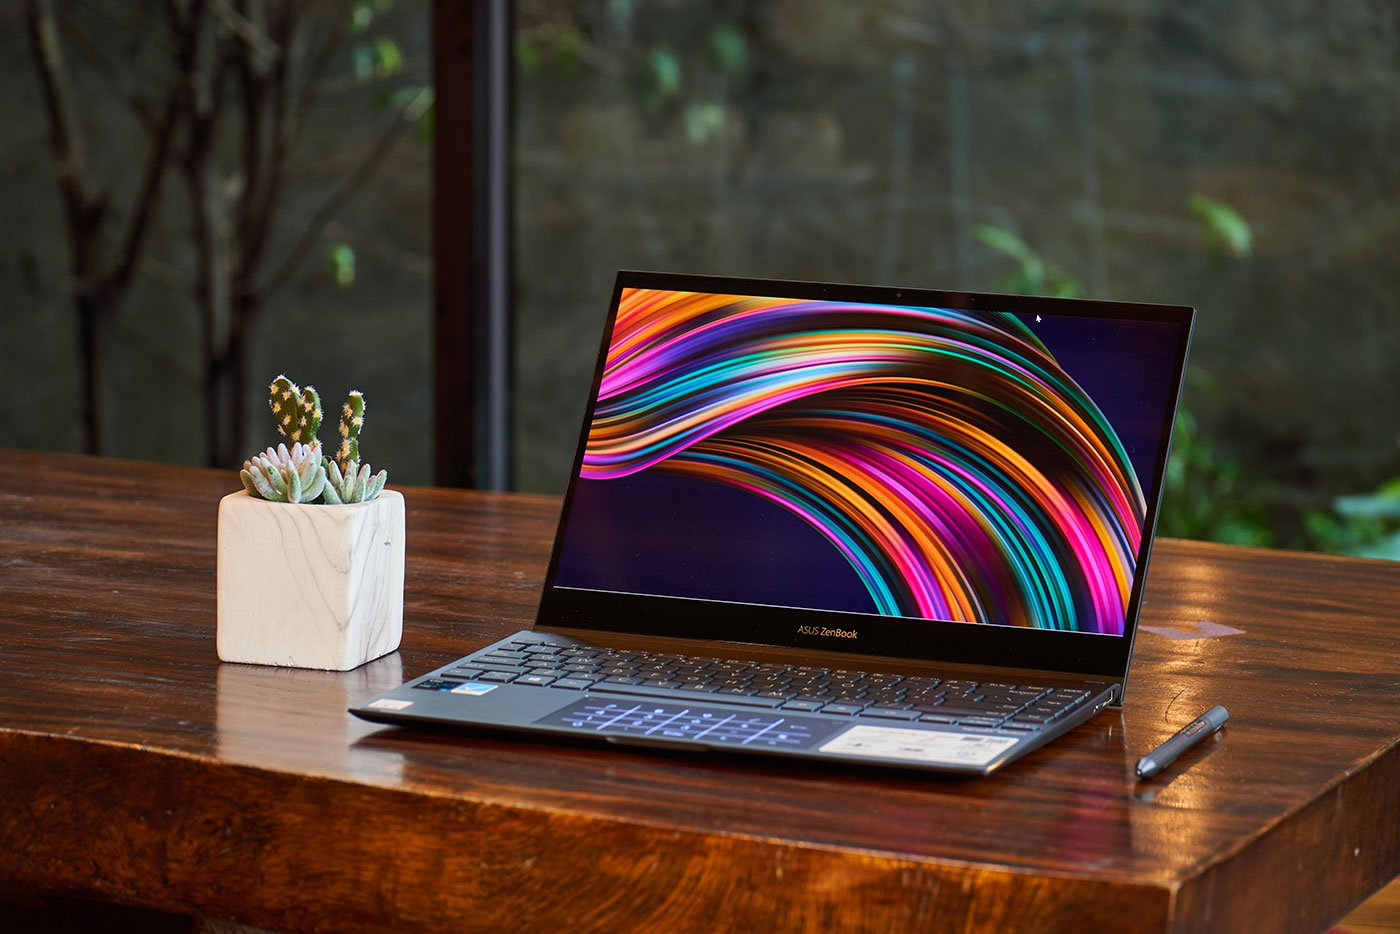 Asus Vivobook Pro 14 OLED review: snappy performance and a smooth screen